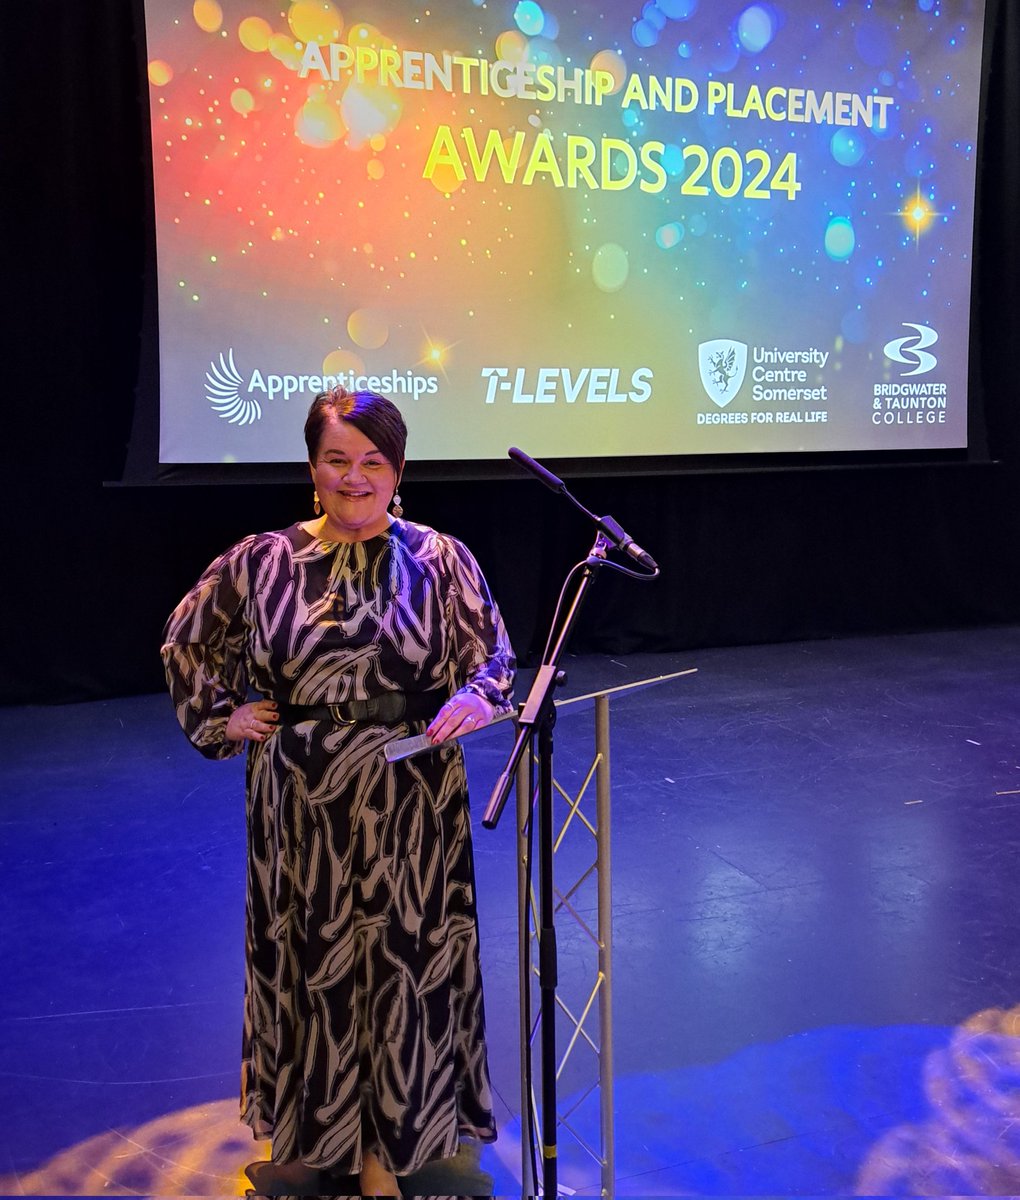 Getting ready to host the Apprenticeship & Placement Awards 2024 for @BTC_Coll! ⭐️

#eventhost 
#apprenticeships 

@mcmillantheatre